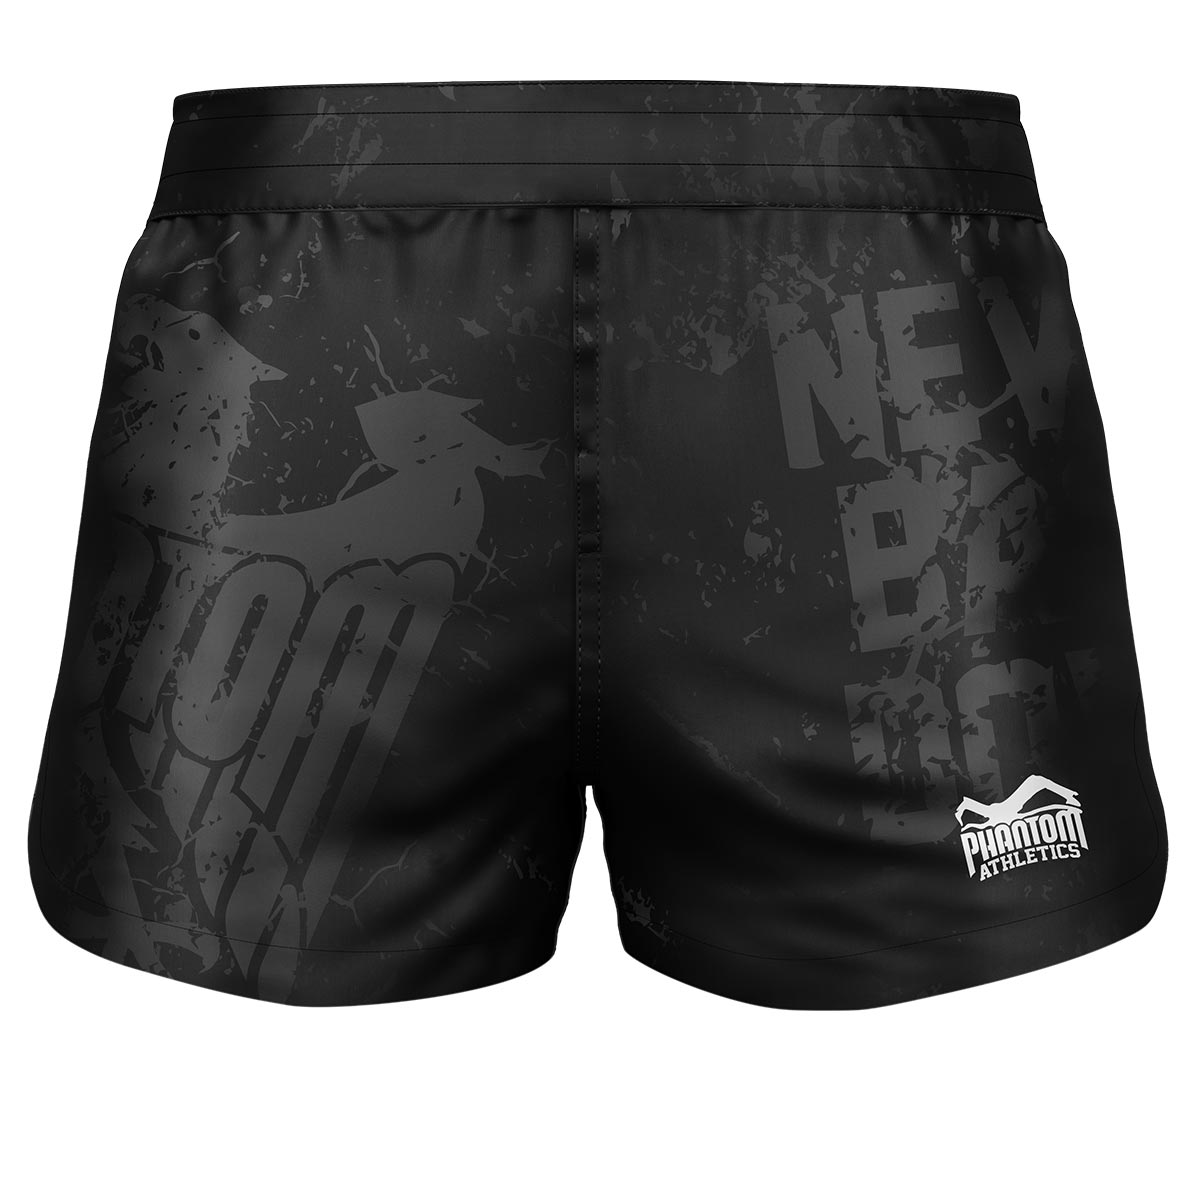 Phantom Fightshorts Fusion 2in1. Ultimate shorts for your martial arts. Ideal for MMA, Muay Thai, BJJ, wrestling and more. In black with Team Germany design.